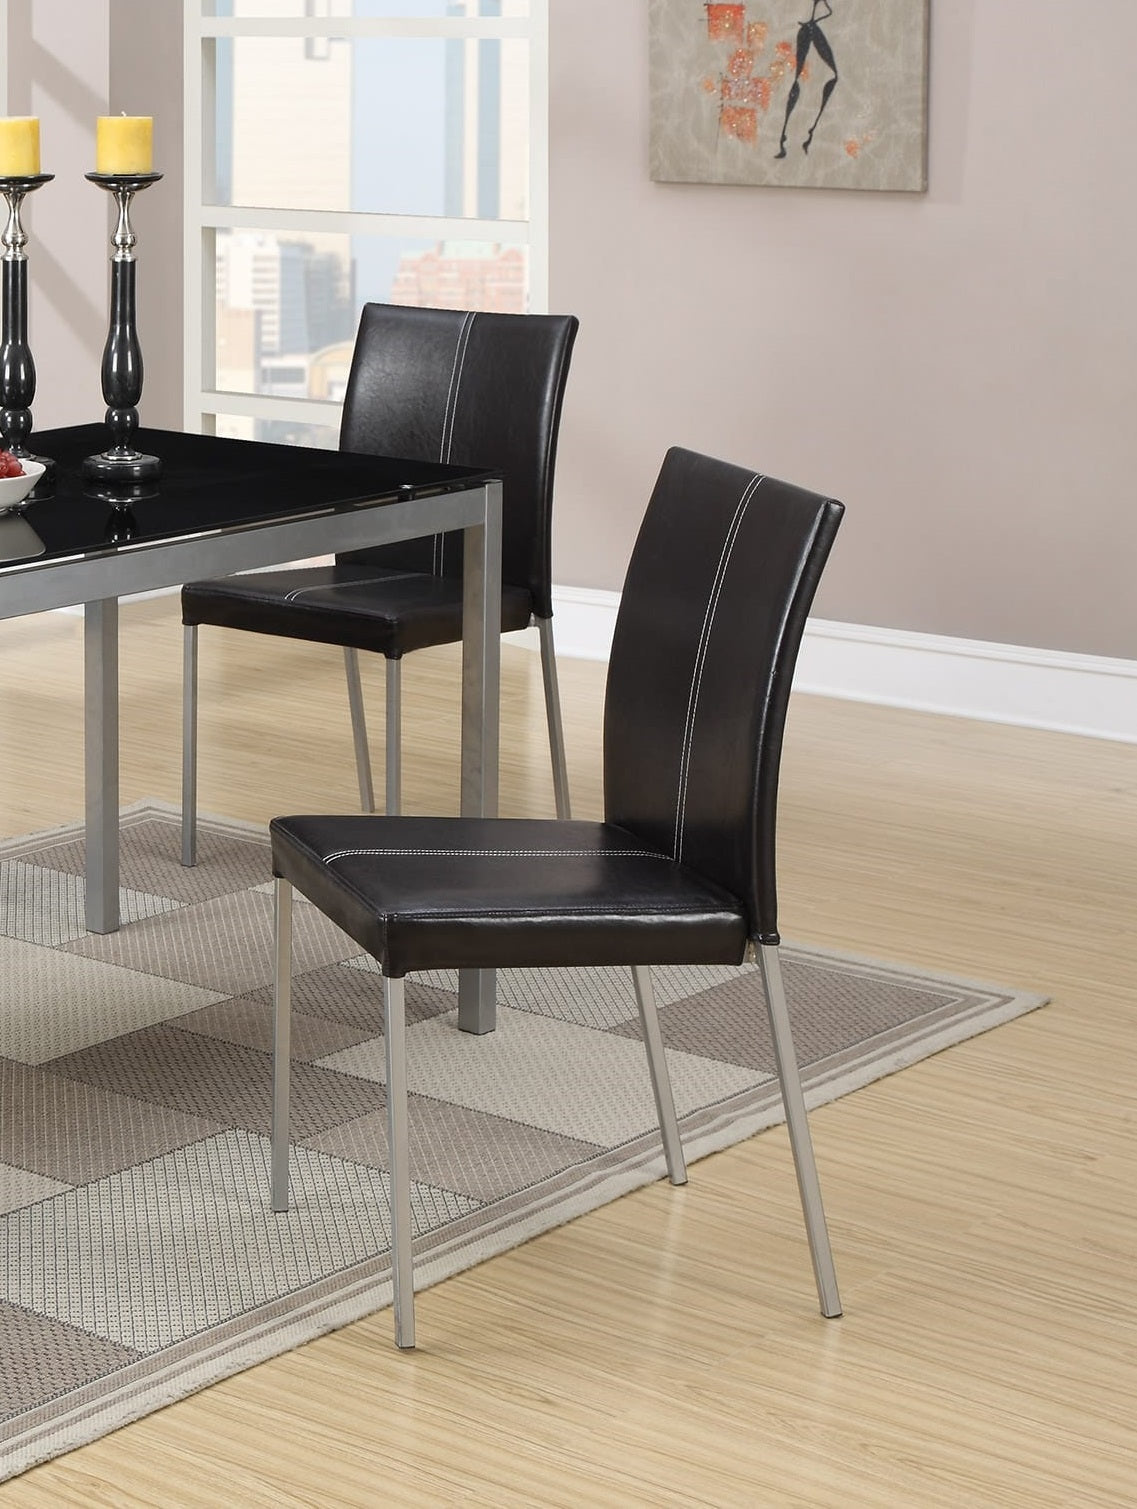 Dinette 5pc Dining Set Table And 4x Chairs Glass Table black-seats 4-metal-dining room-48